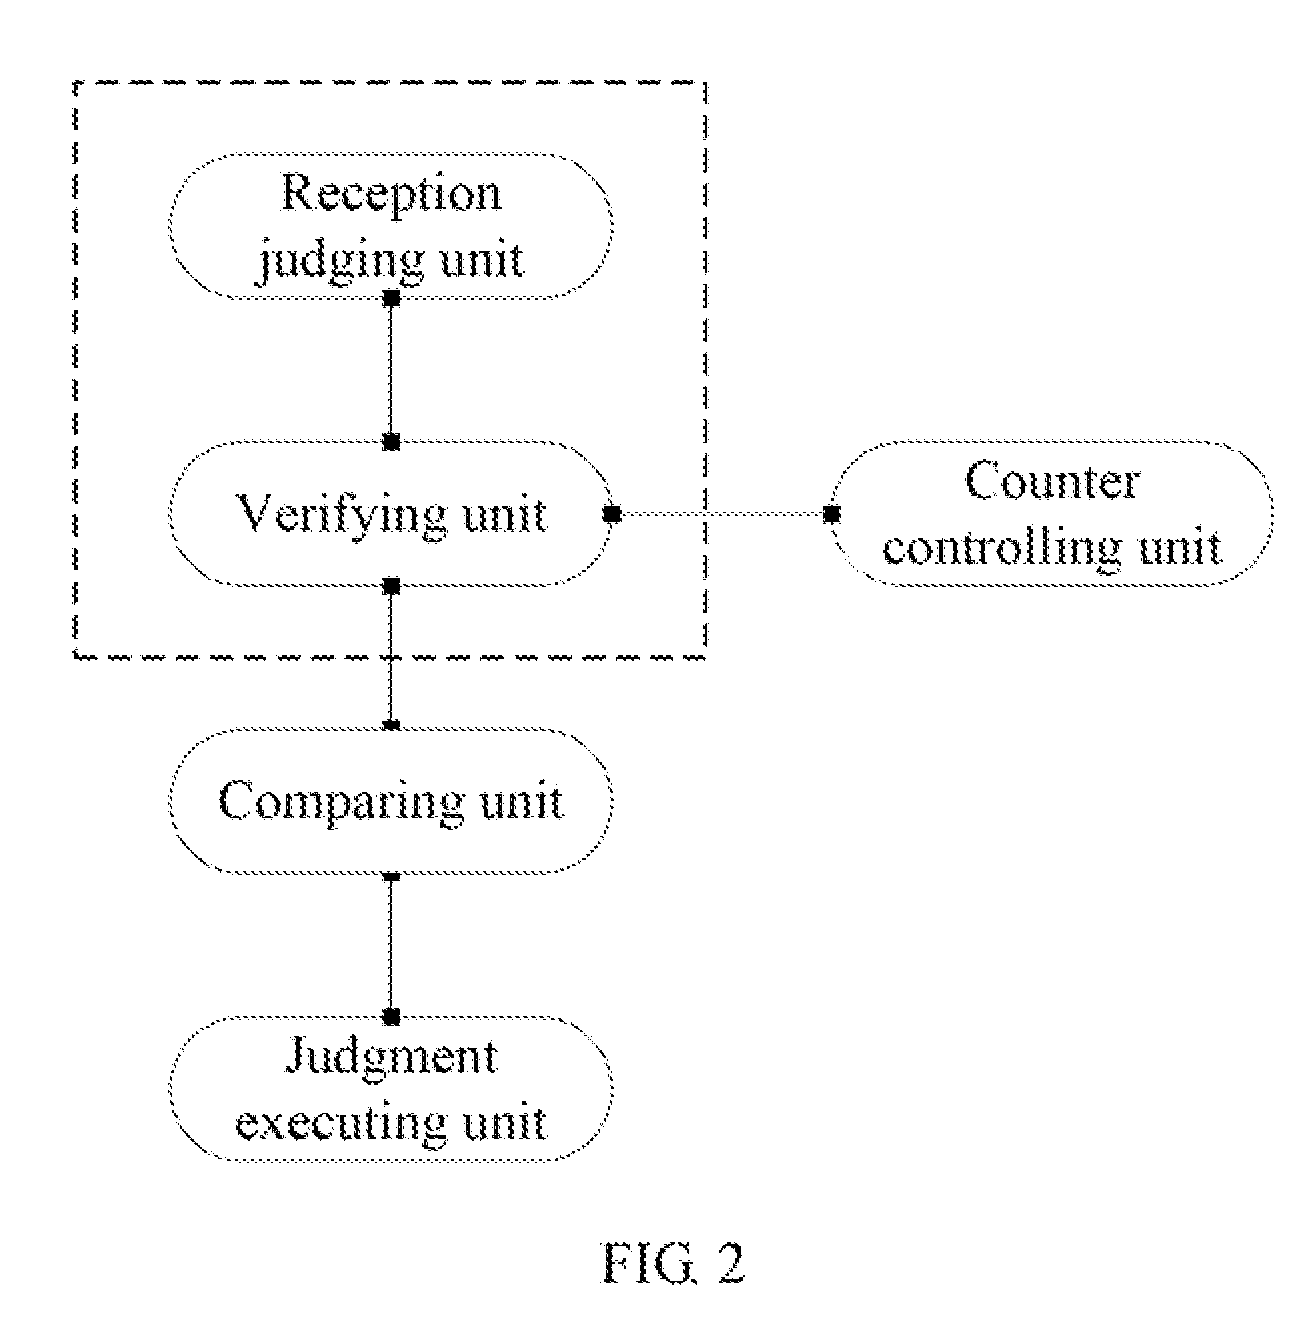 Method and apparatus for defending against arp spoofing attacks